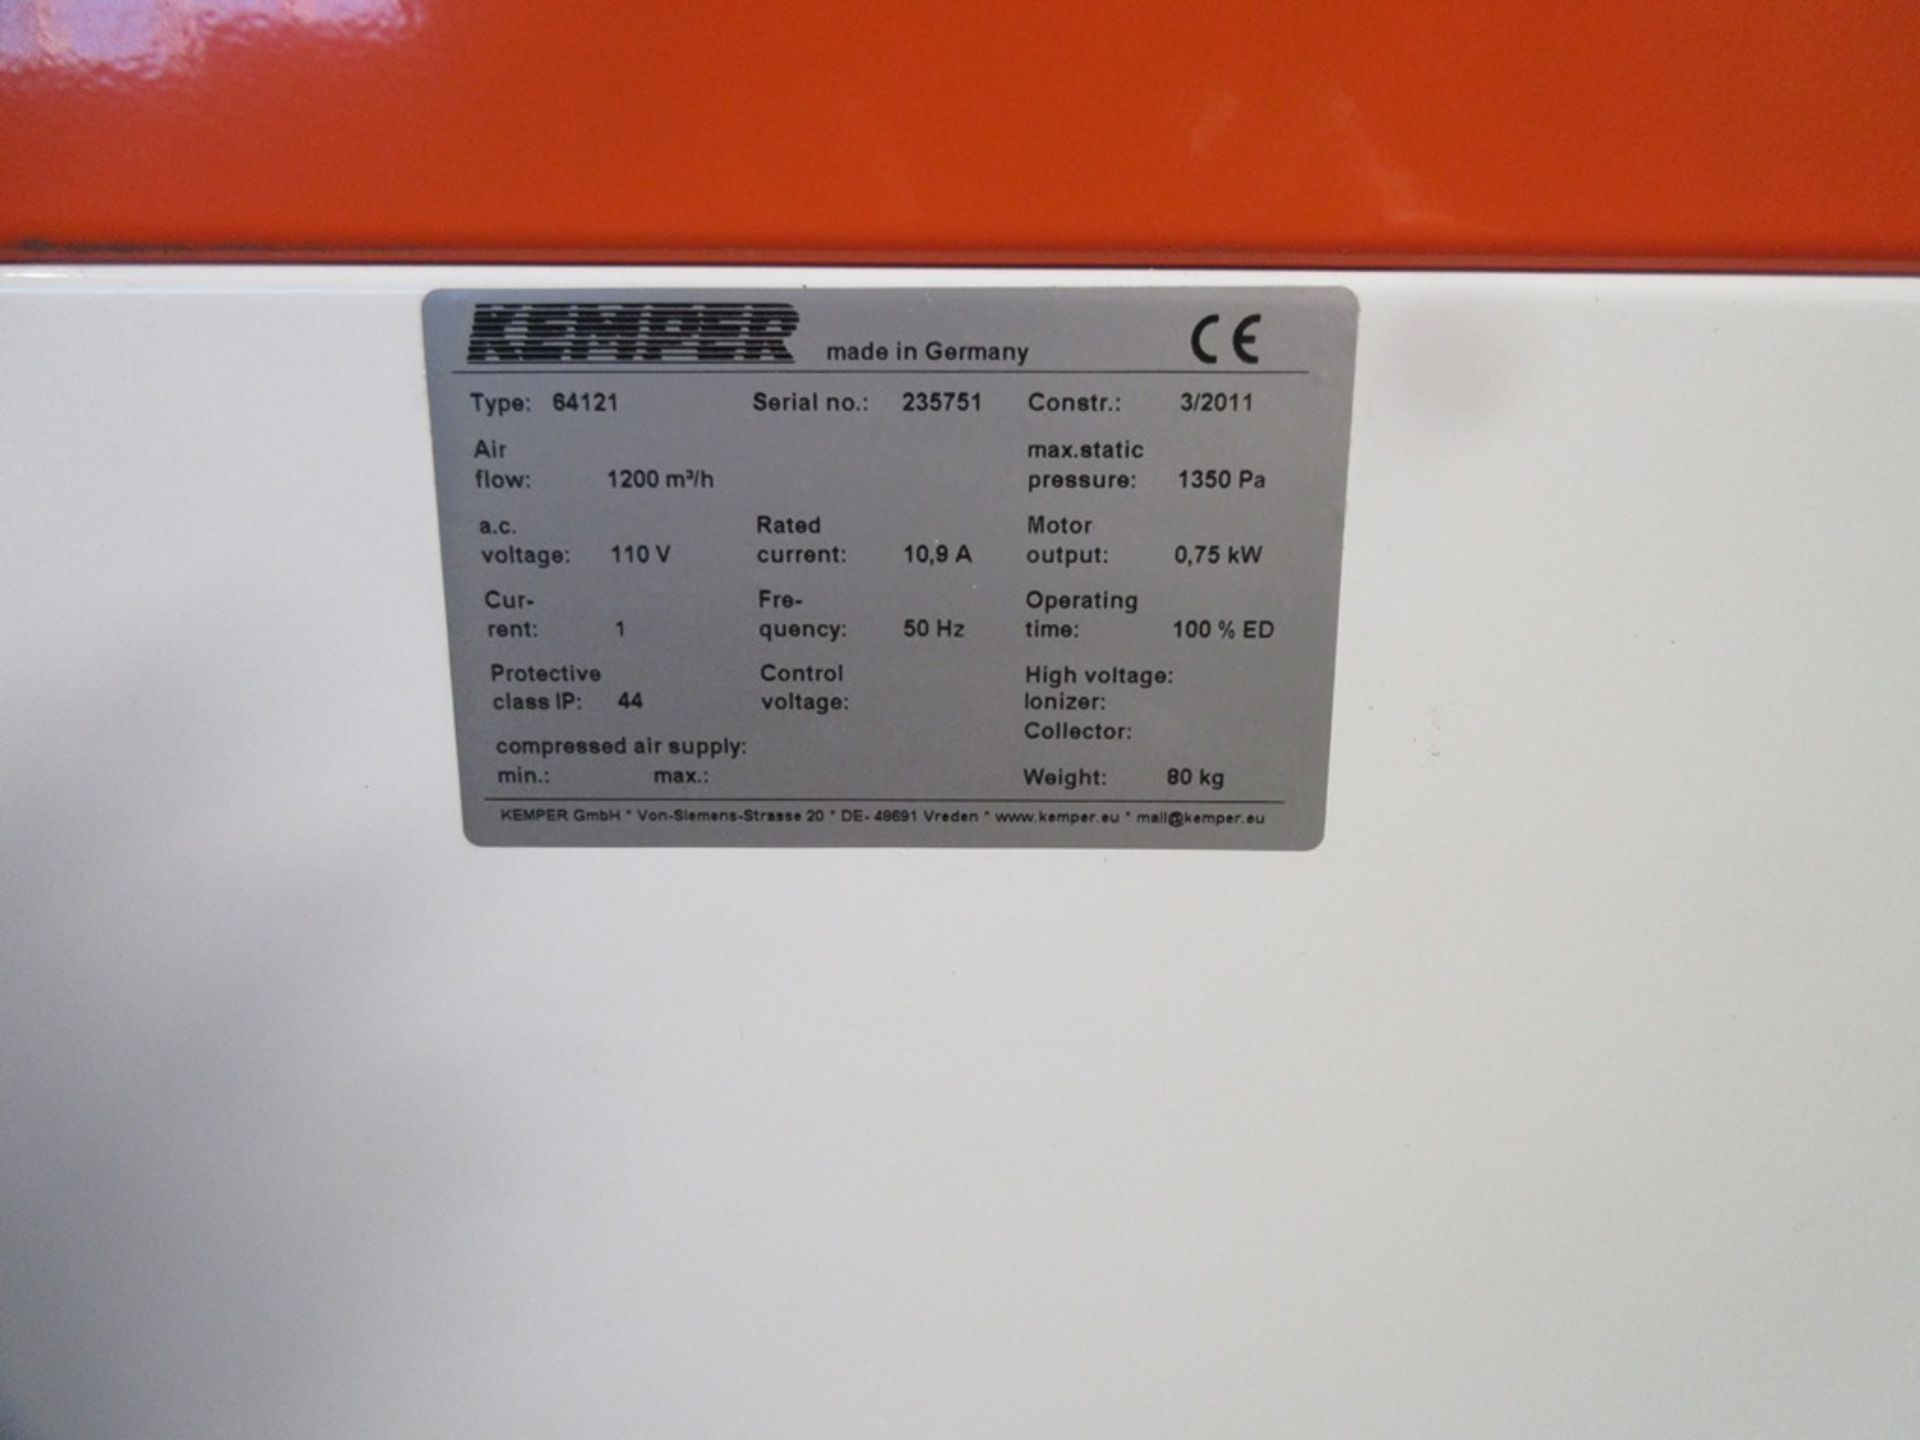 Kemper Filter master, fume extraction unit, Type - 64121, S/No - 235751 11OV, (2011) - packaged & - Image 3 of 4